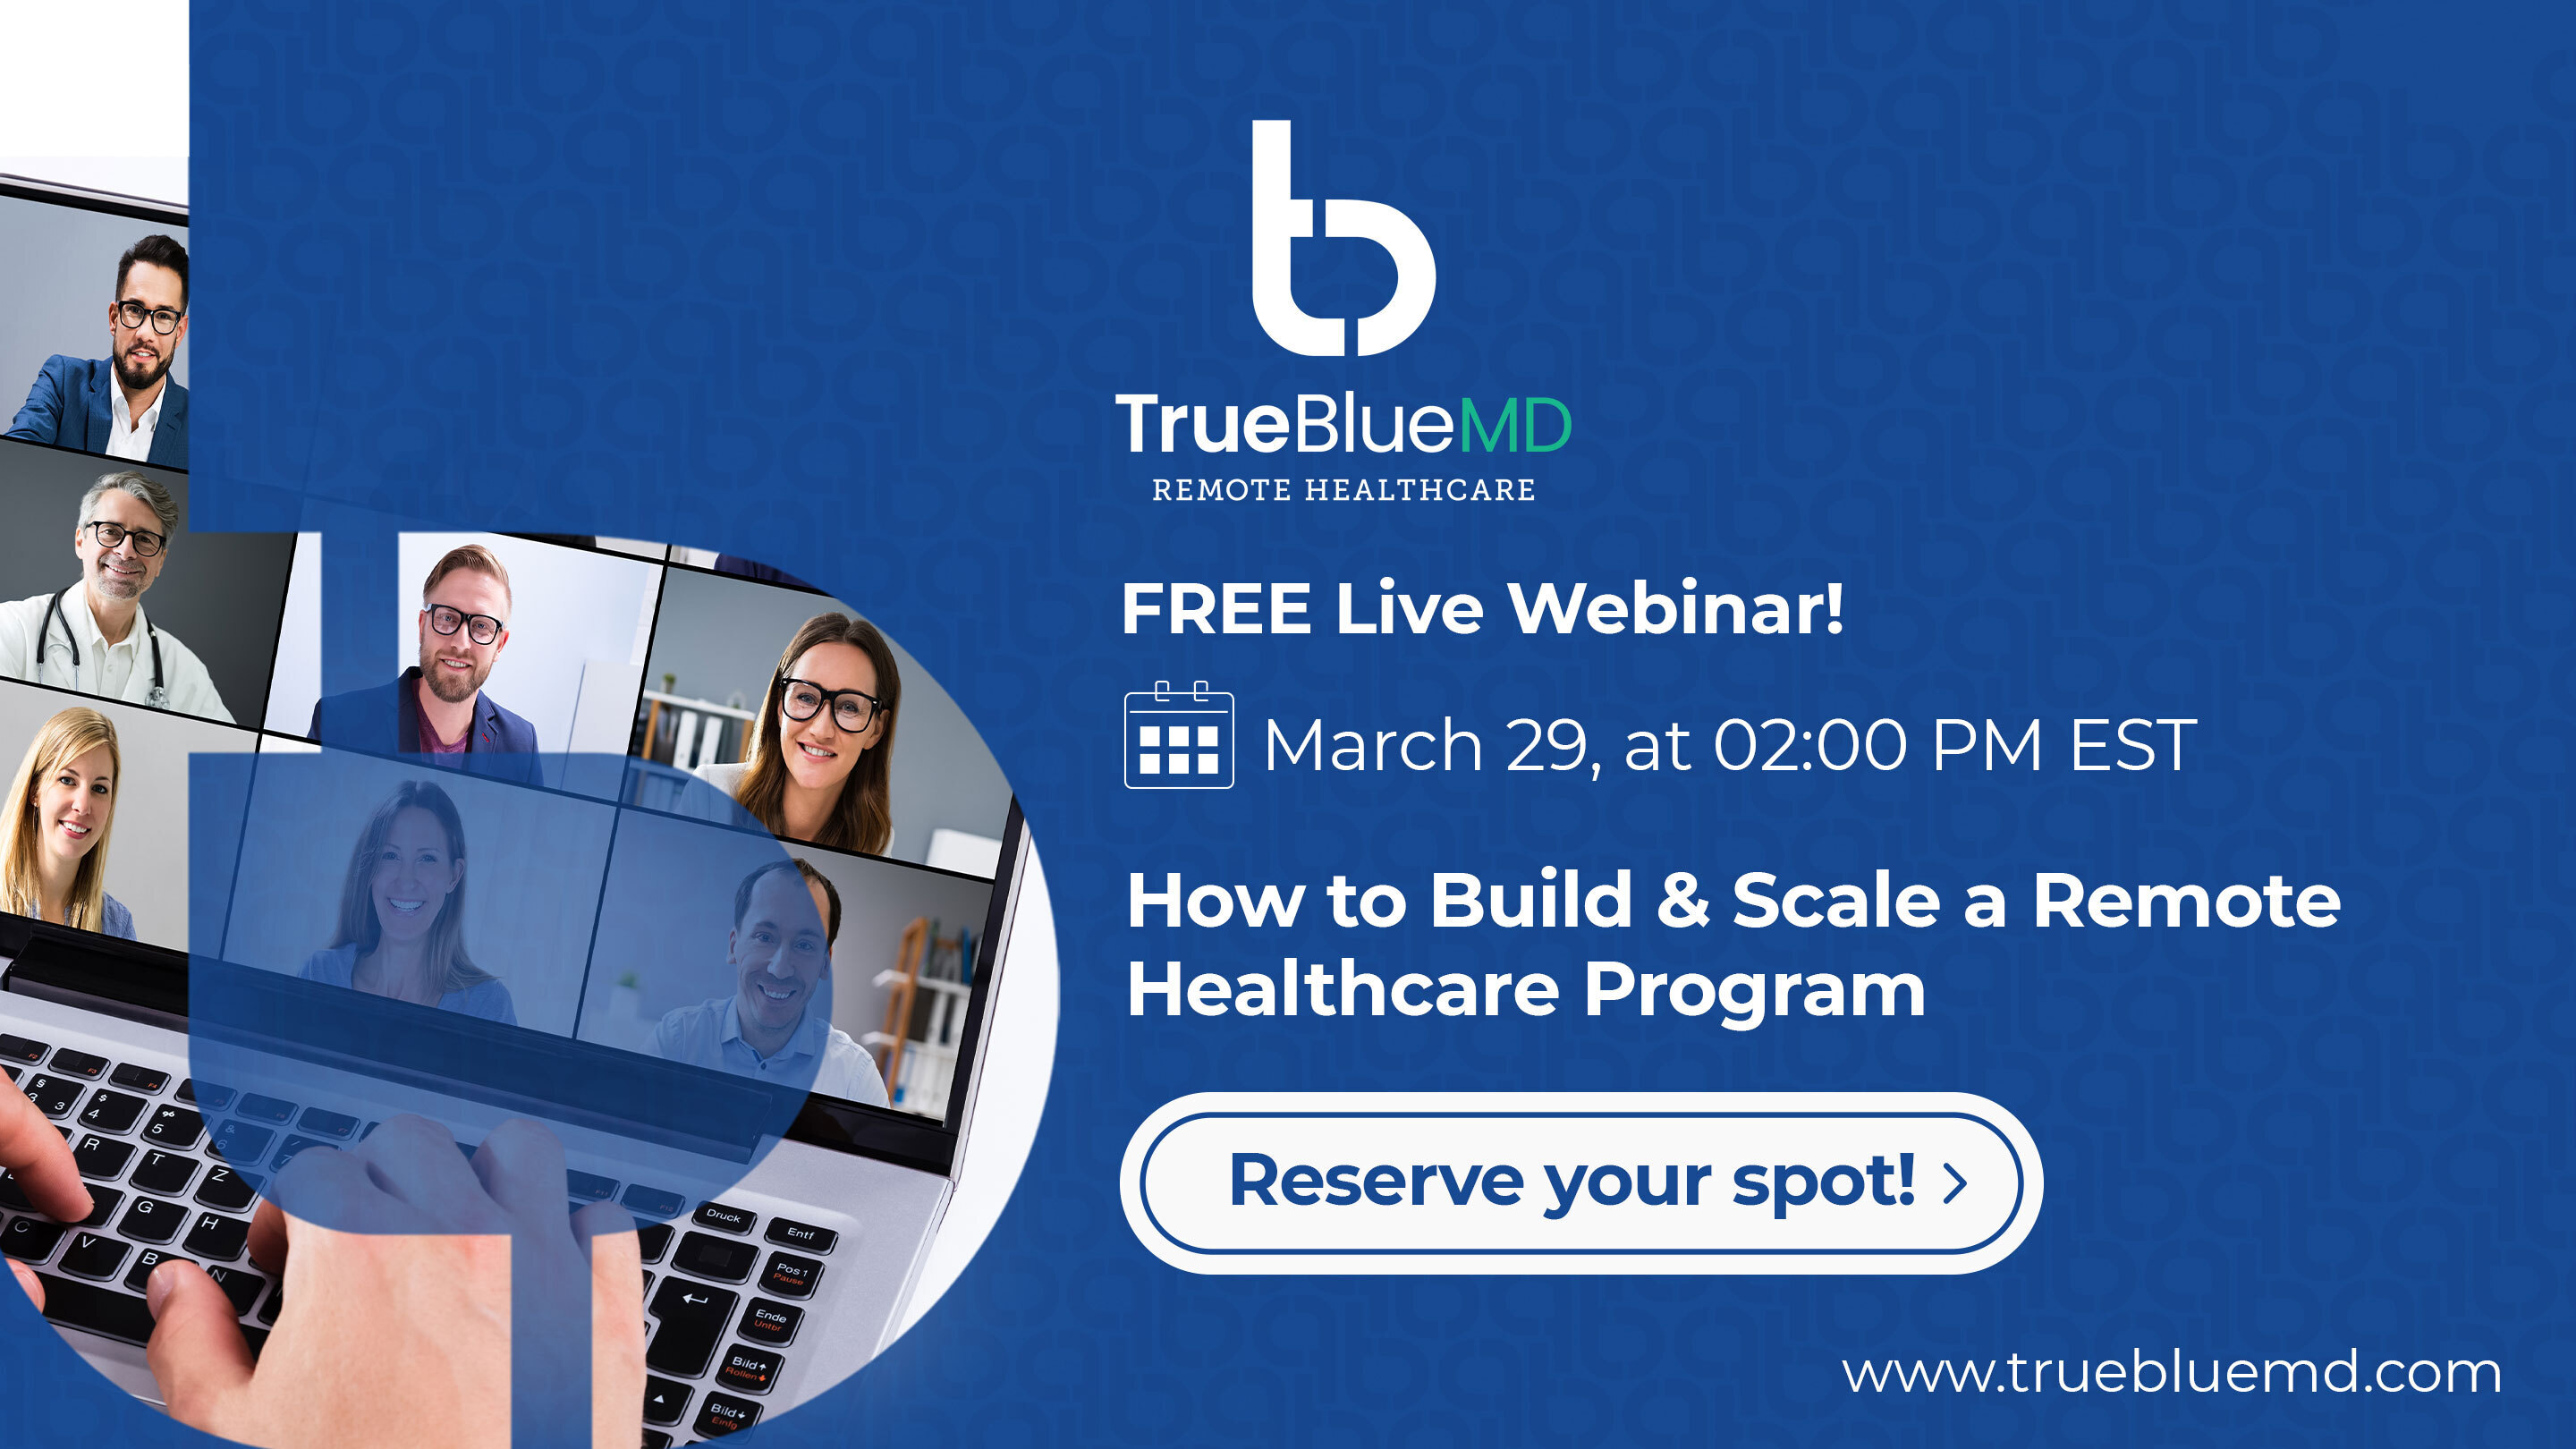 [FREE LIVE WEBINAR] How to Build & Scale a Remote Healthcare Program, Online Event